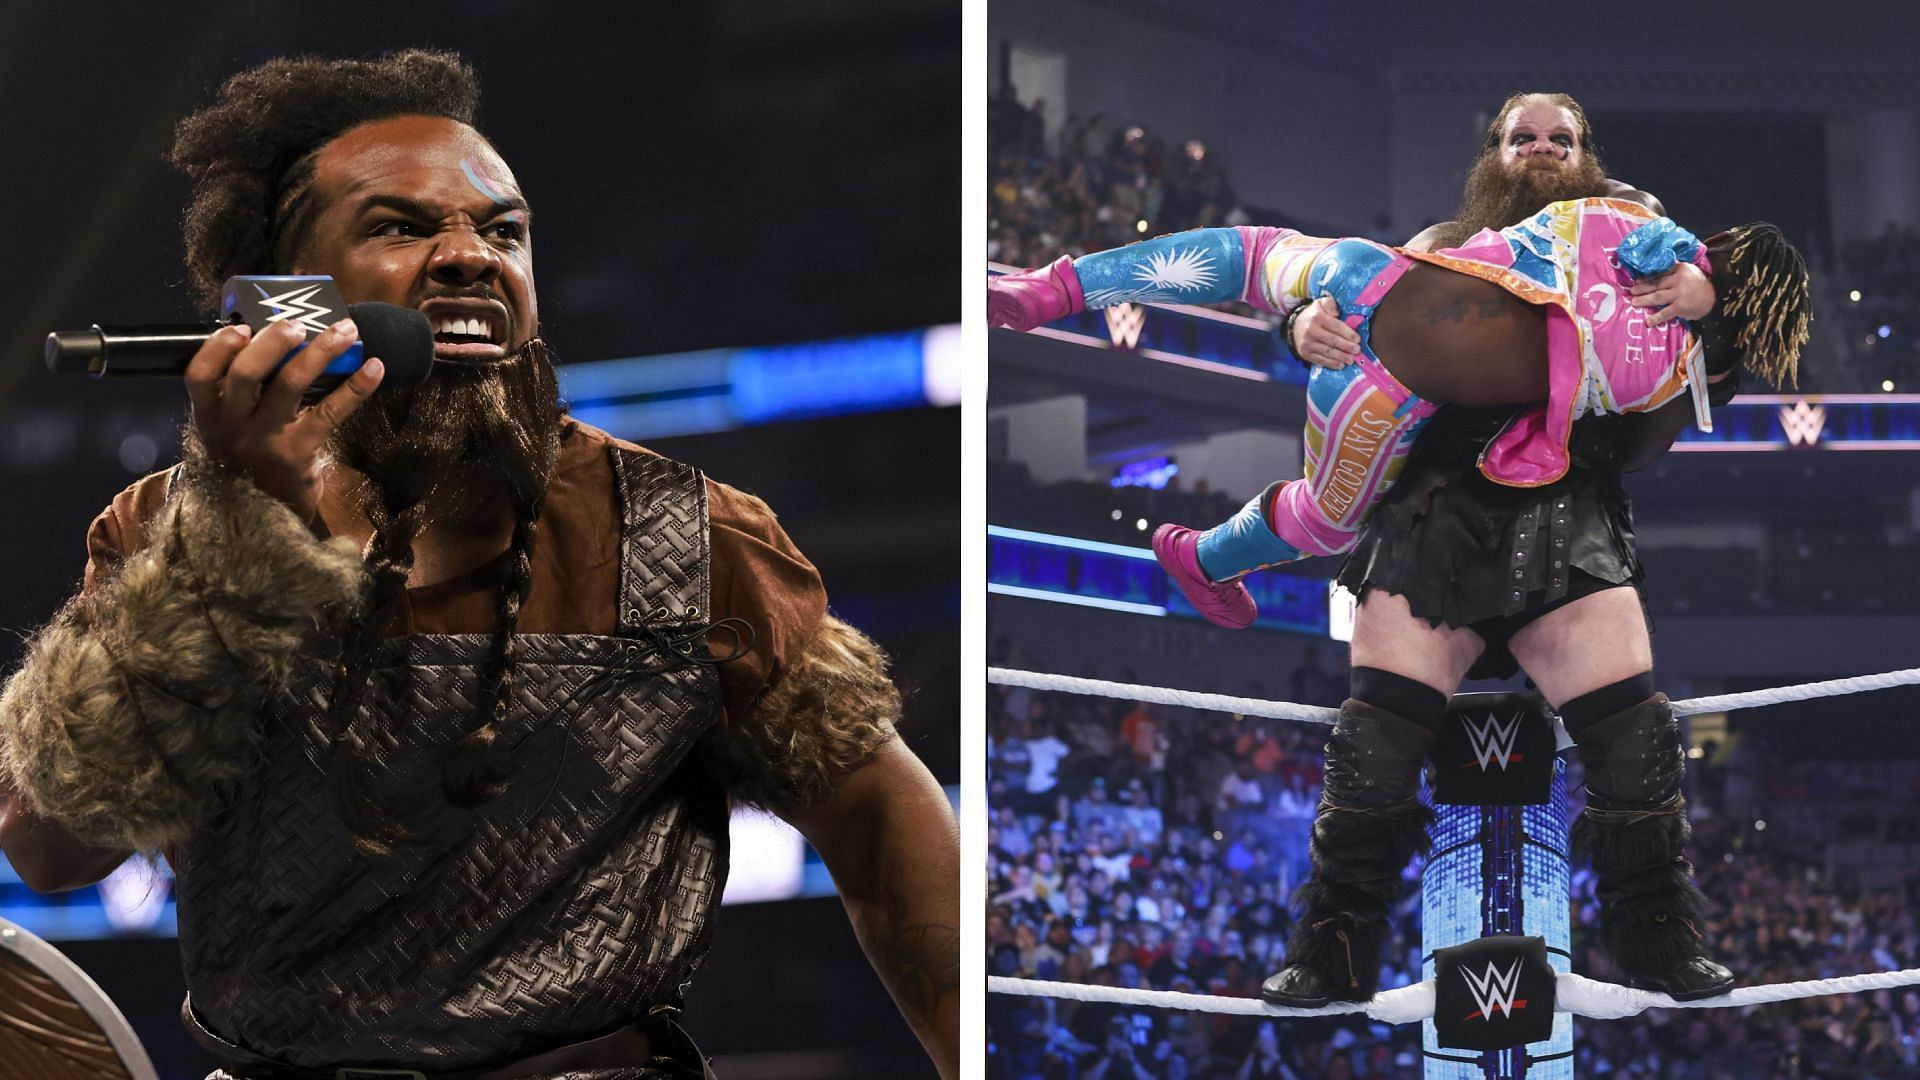 The New Day and The Viking Raiders are going at it on WWE SmackDown!